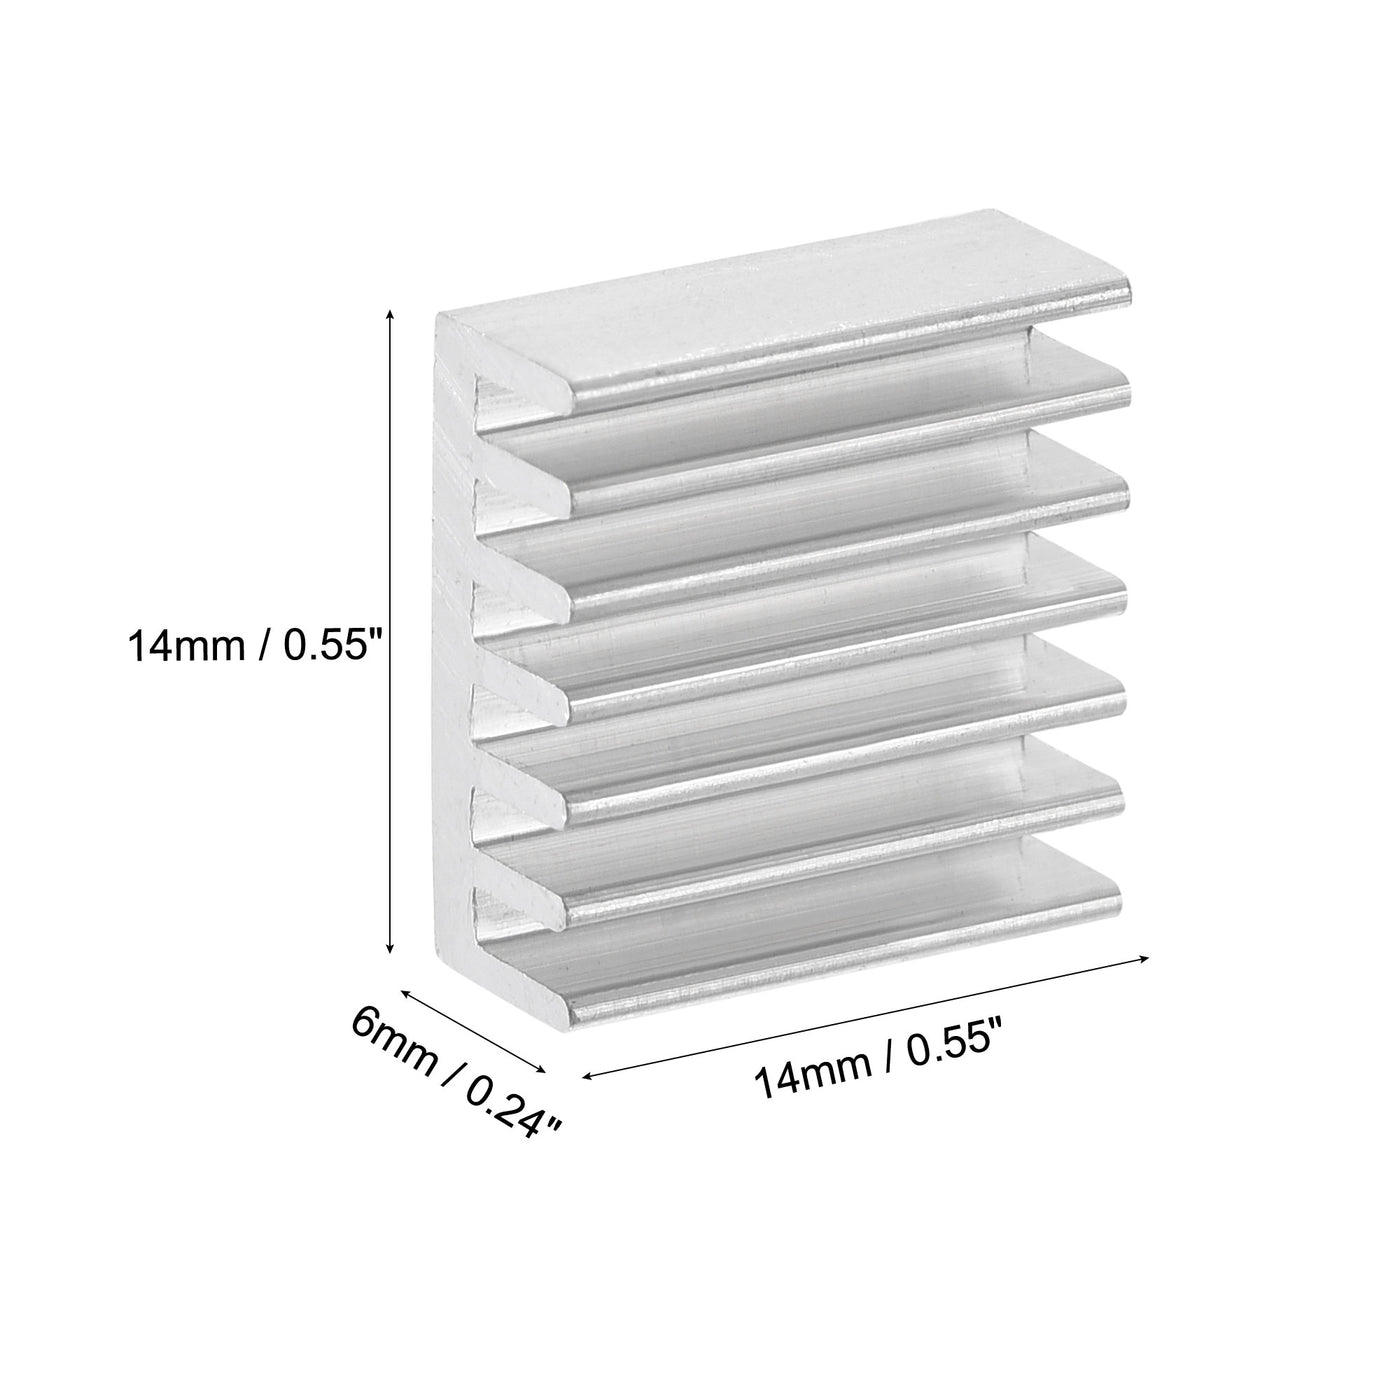 uxcell Uxcell 14x14x6mm Aluminum Heatsink Electronics Cooler for MOS IC Chip Silver 100 Pcs